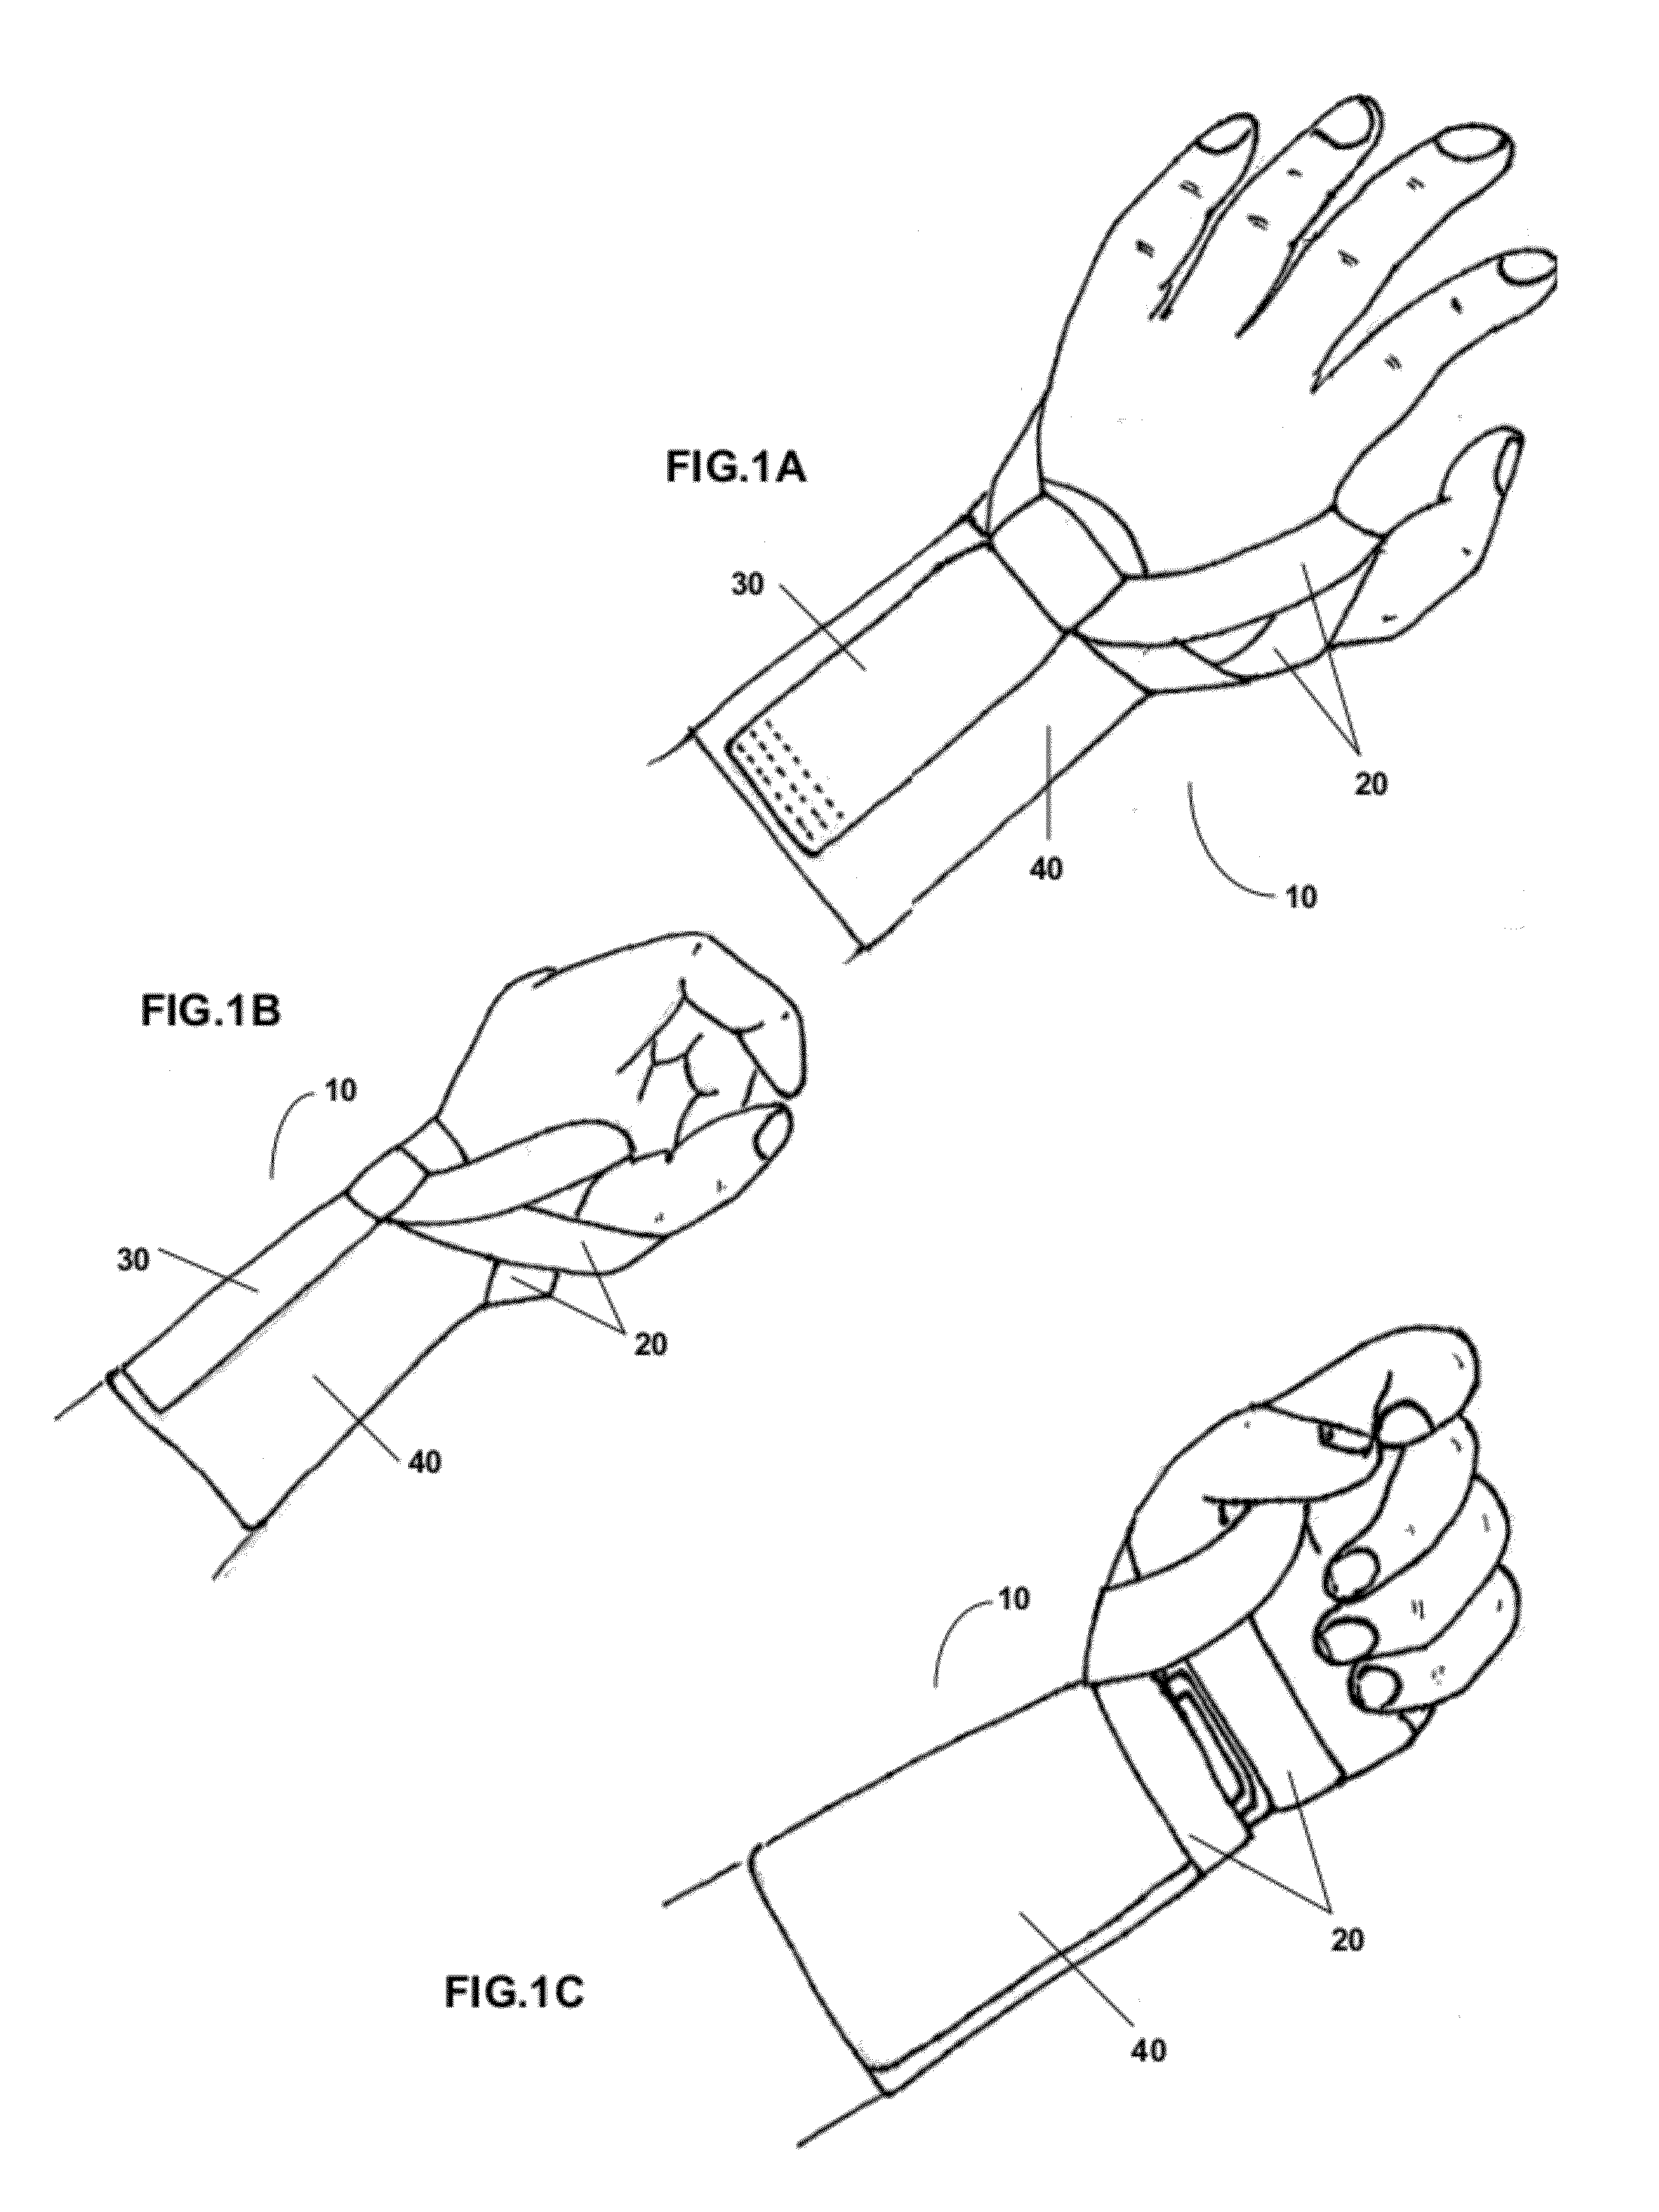 Modular Upper Extremity Support System